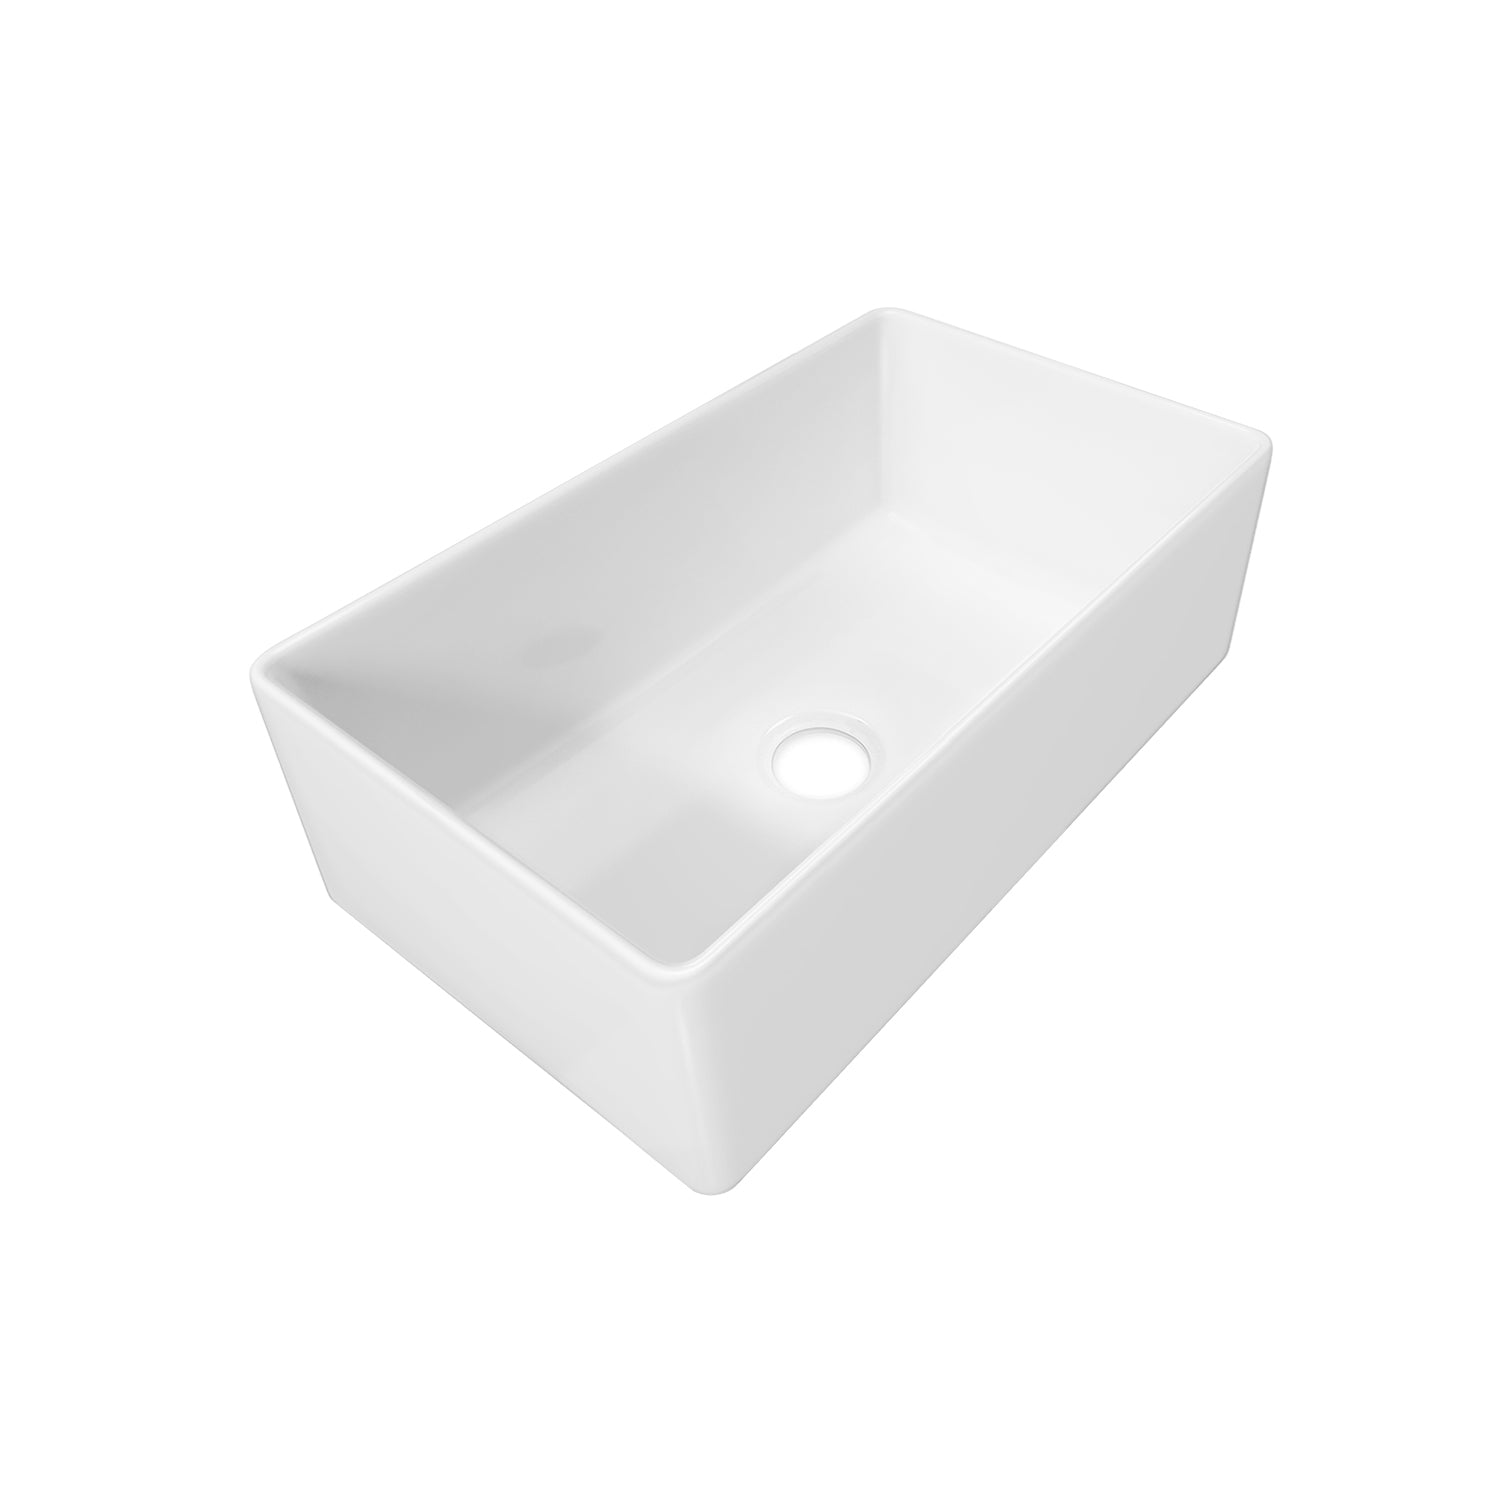 Sinber 30 Inch Farmhouse Apron Single Bowl Kitchen Sink with Fireclay White Finish 2 Accessories F3018S-OL